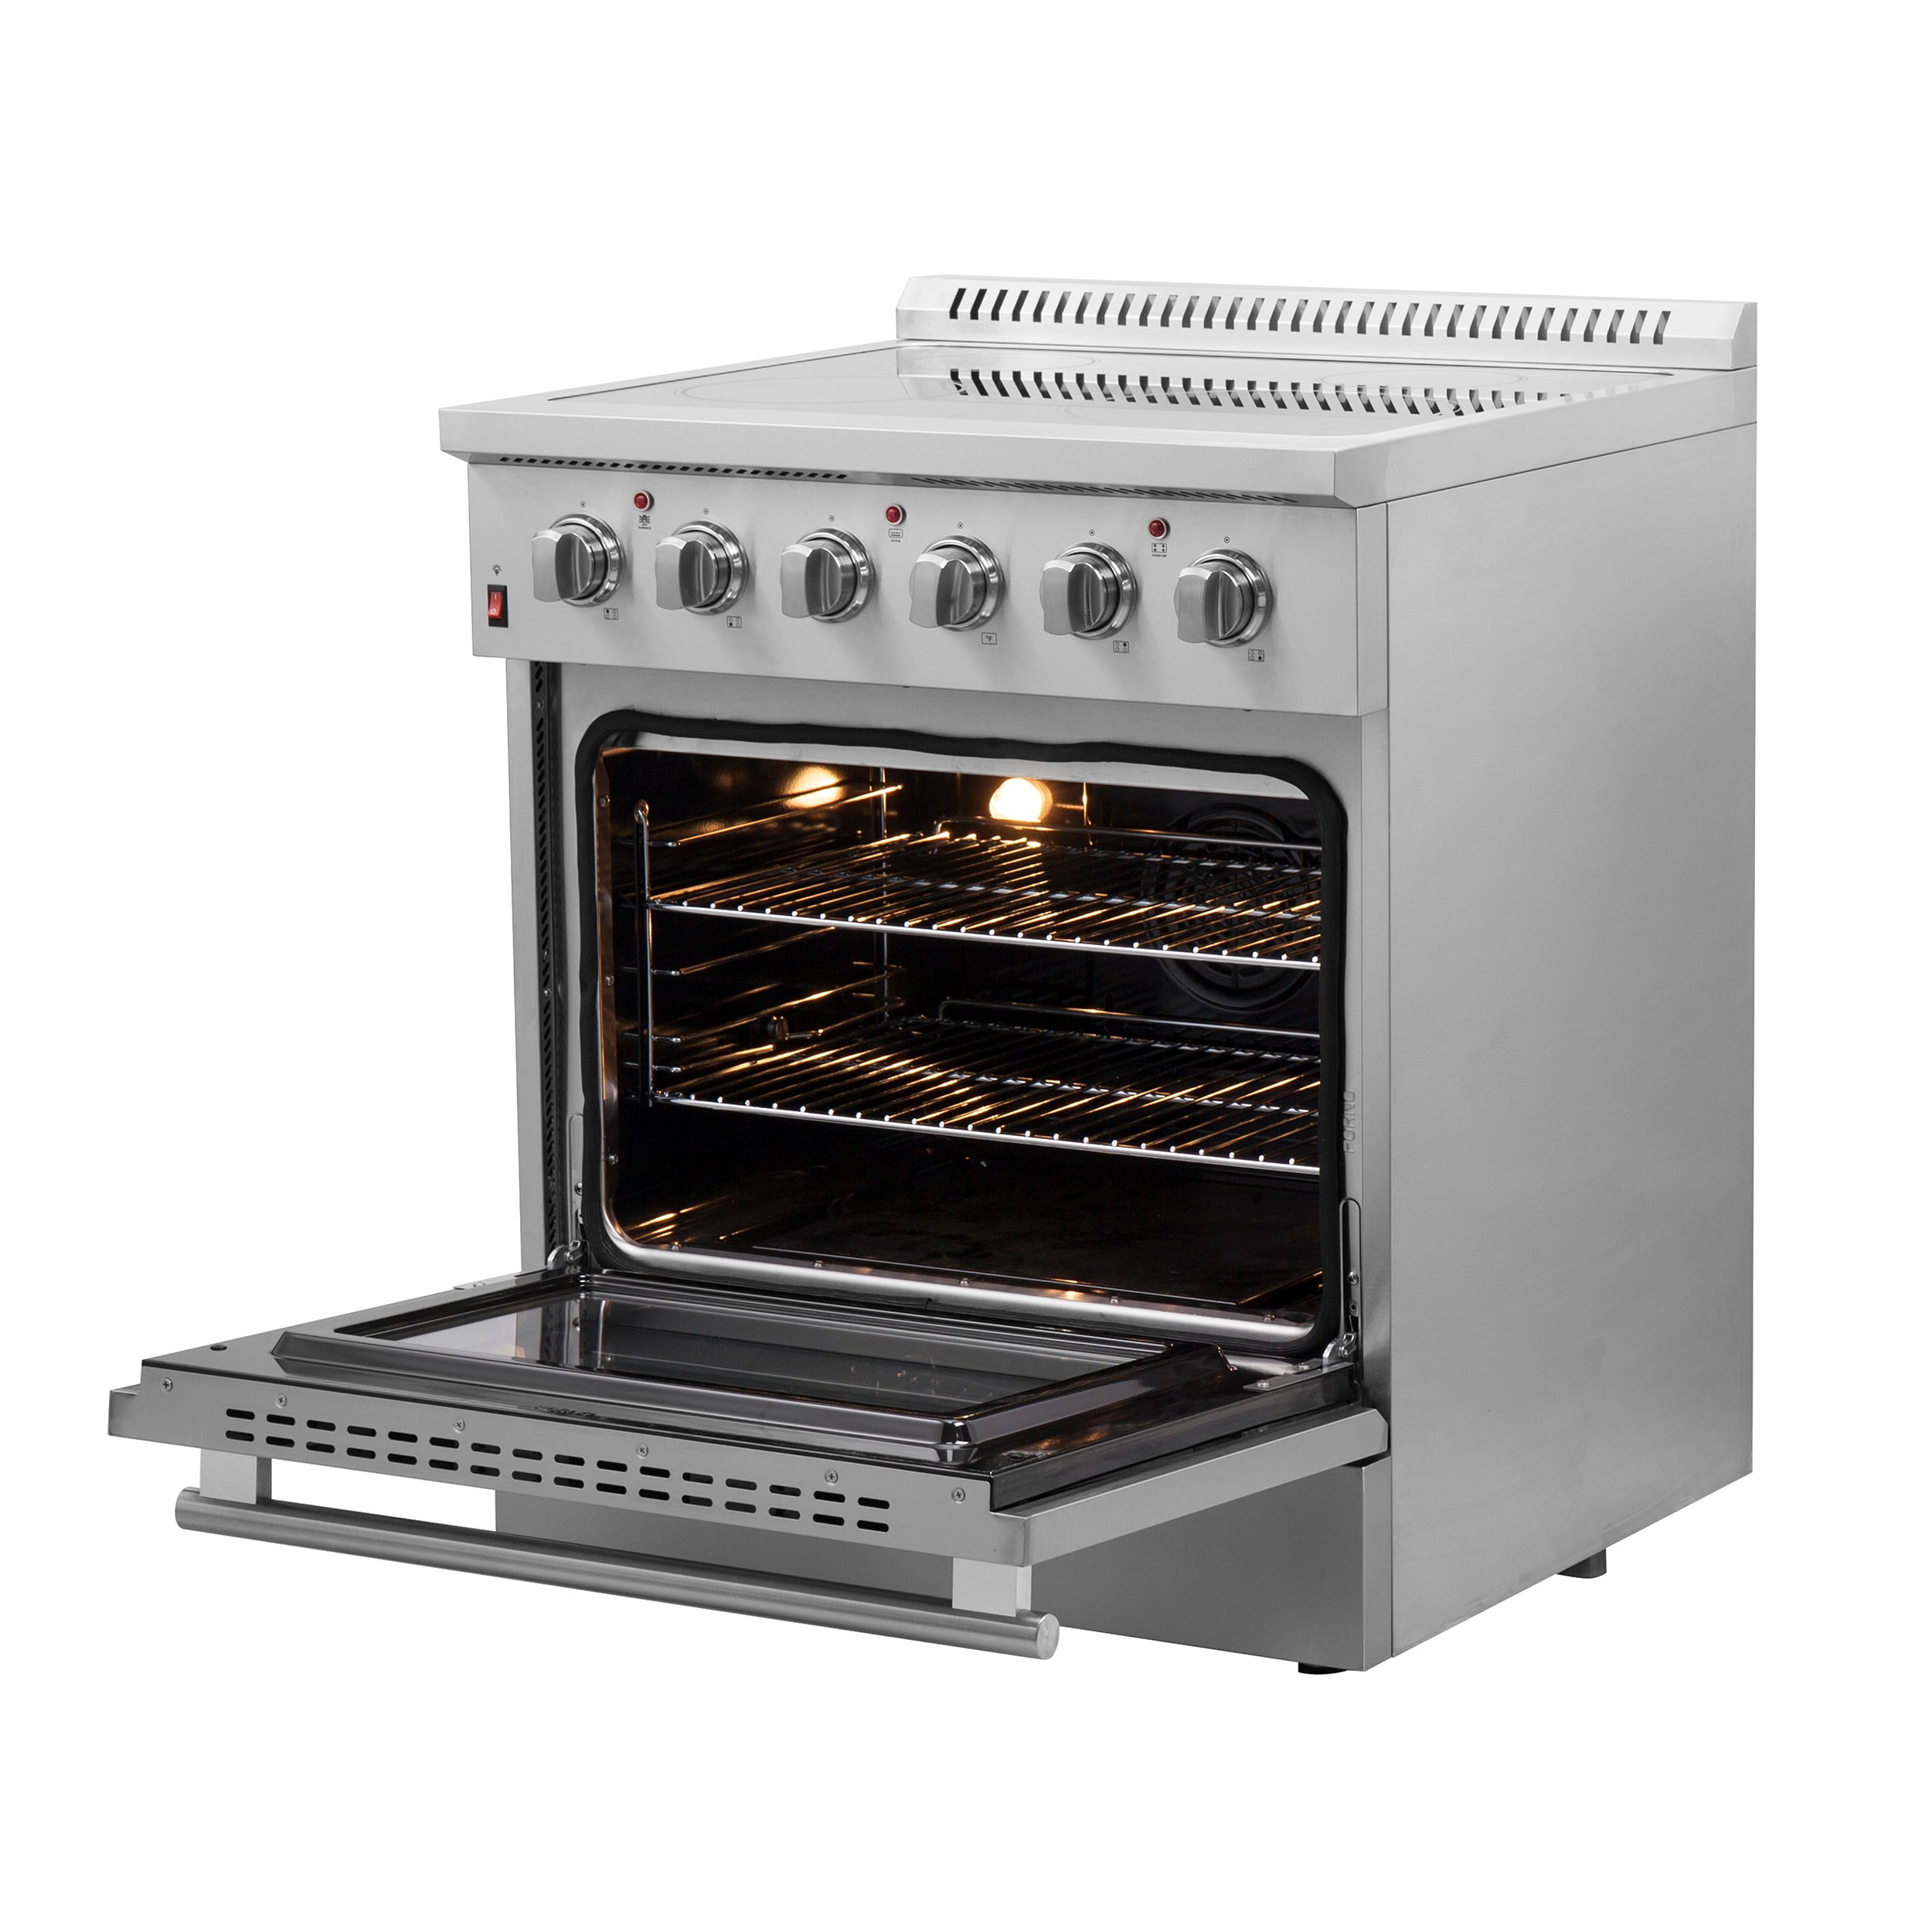 Awoco 30” Freestanding 4 Burners Range with 3.5 cu ft. Convection Oven